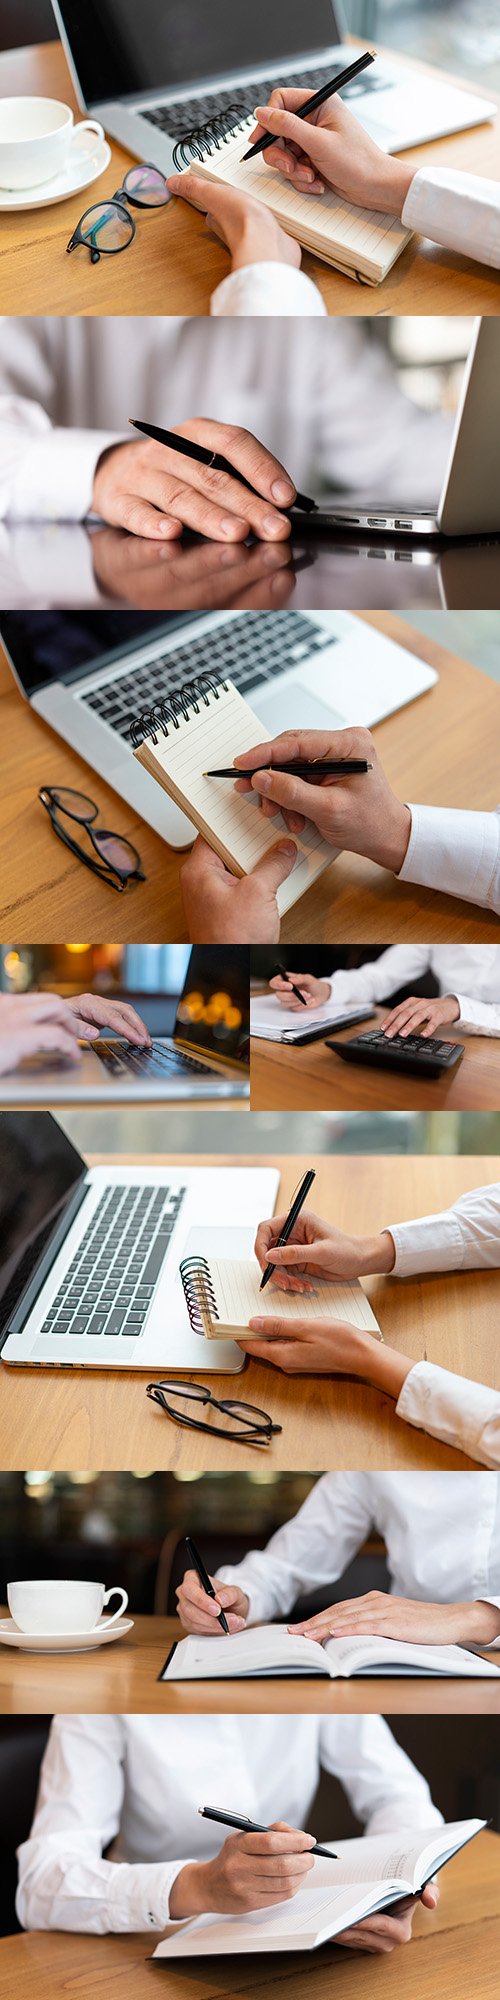 Business desktop, hands with notebook and keyboard